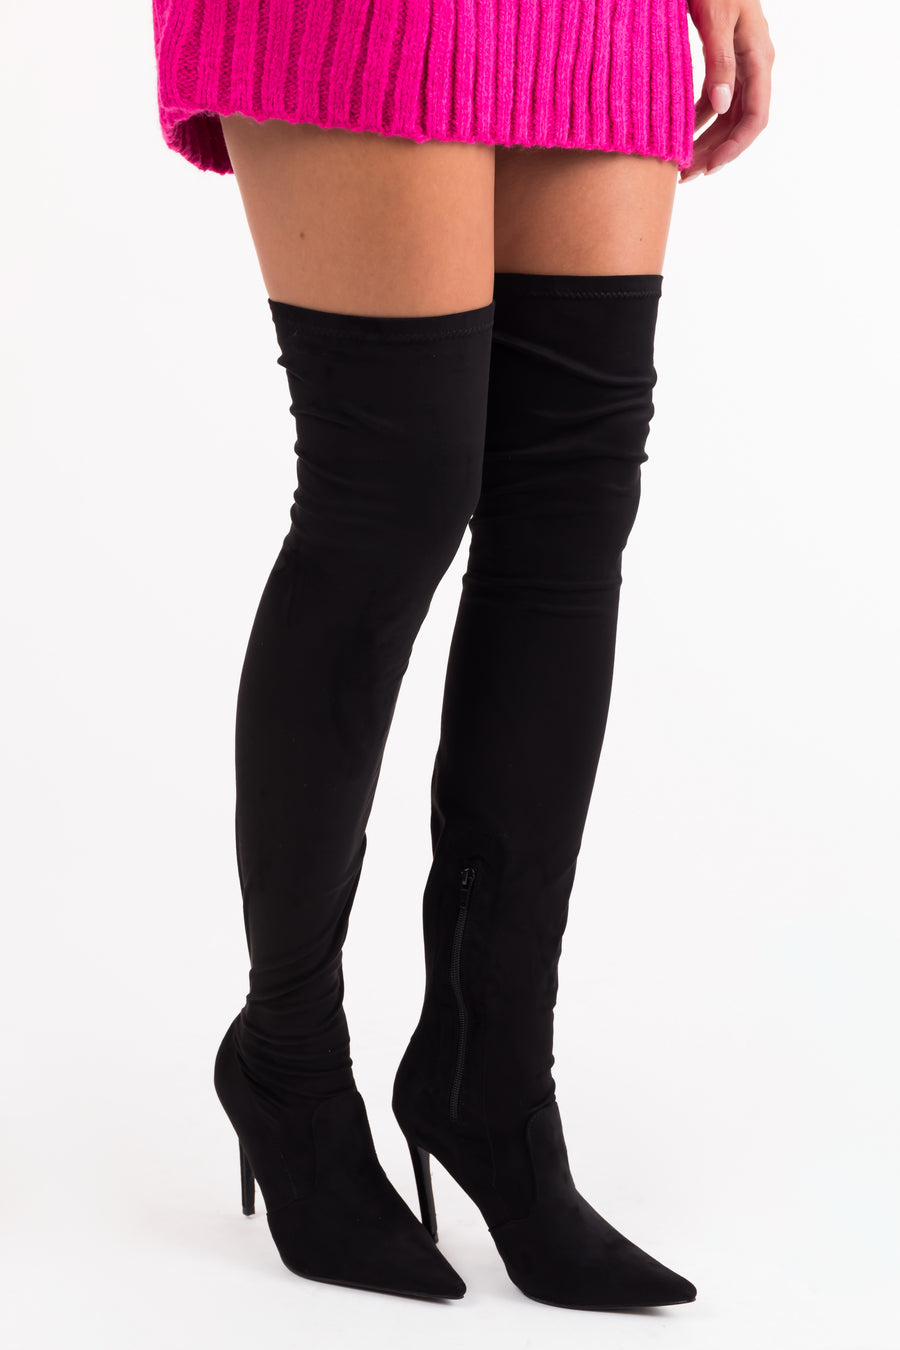 Black Suede Pointy Toe Thigh High Heel Boots